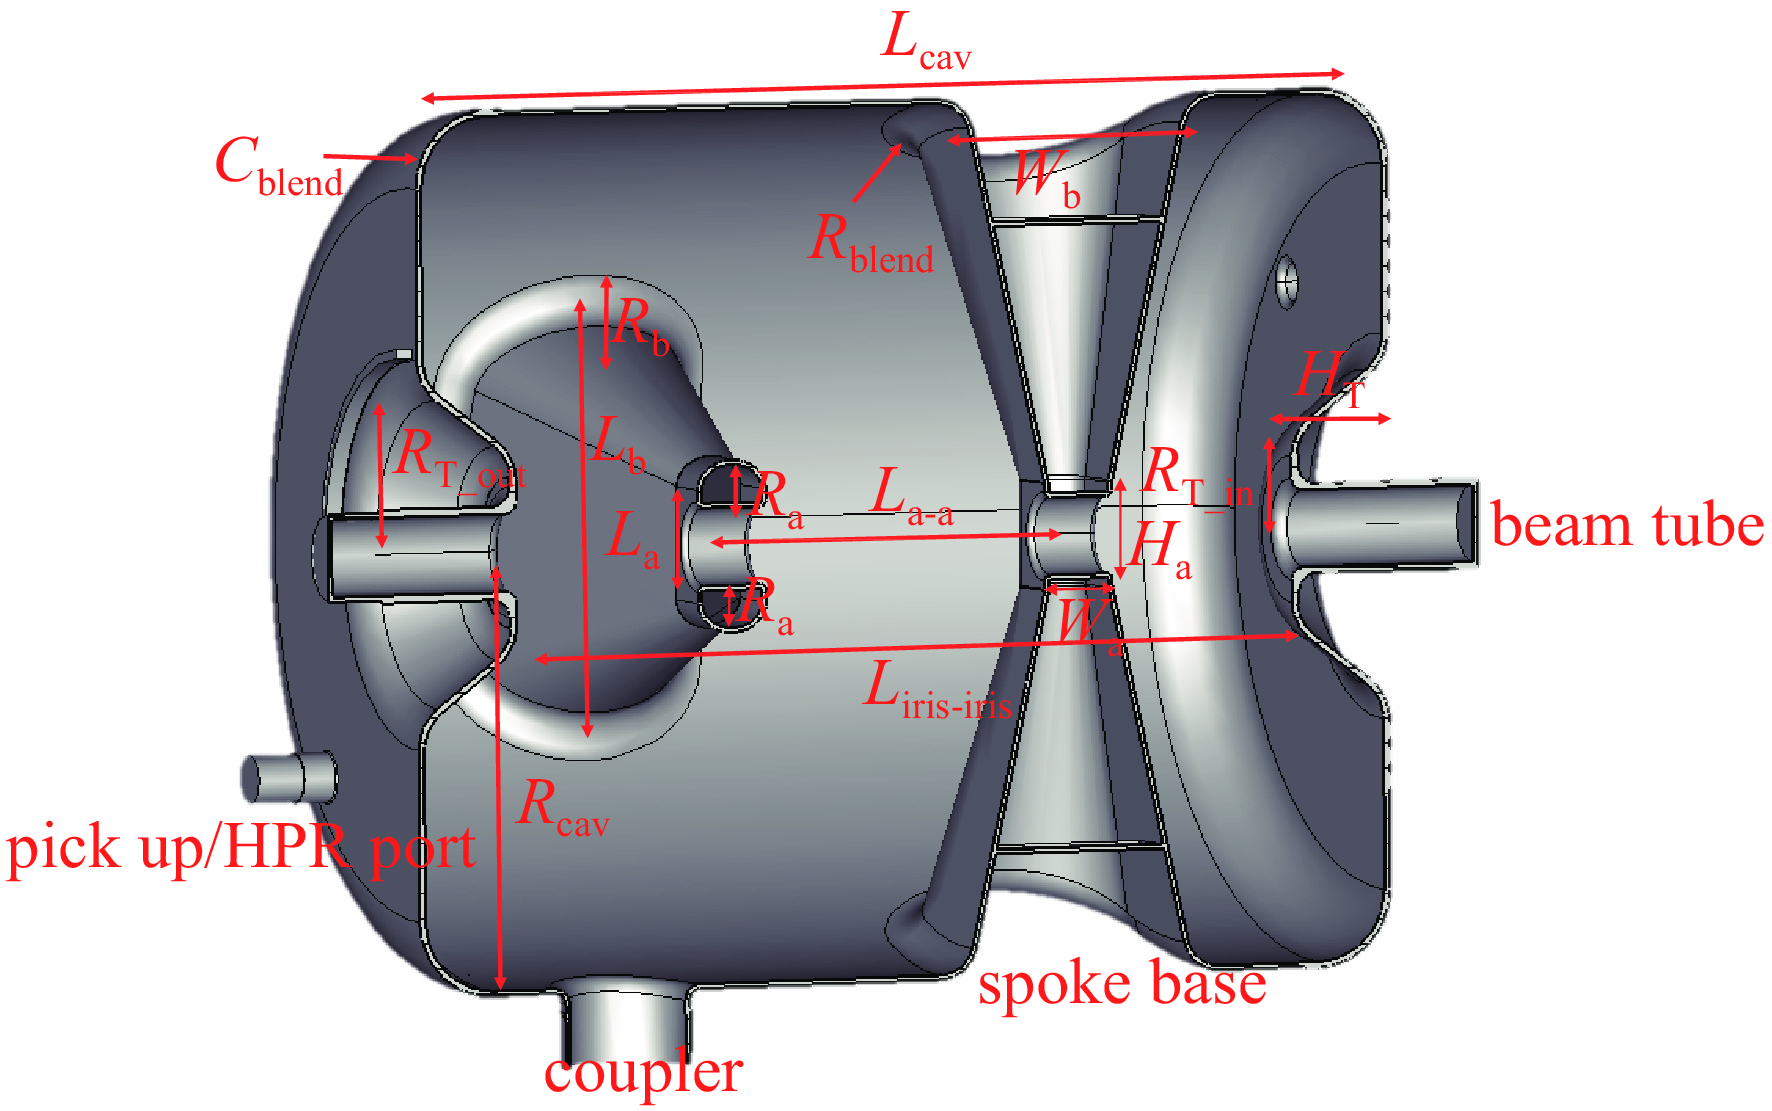 Schematic diagram of basic parameters of double-spoke cavity